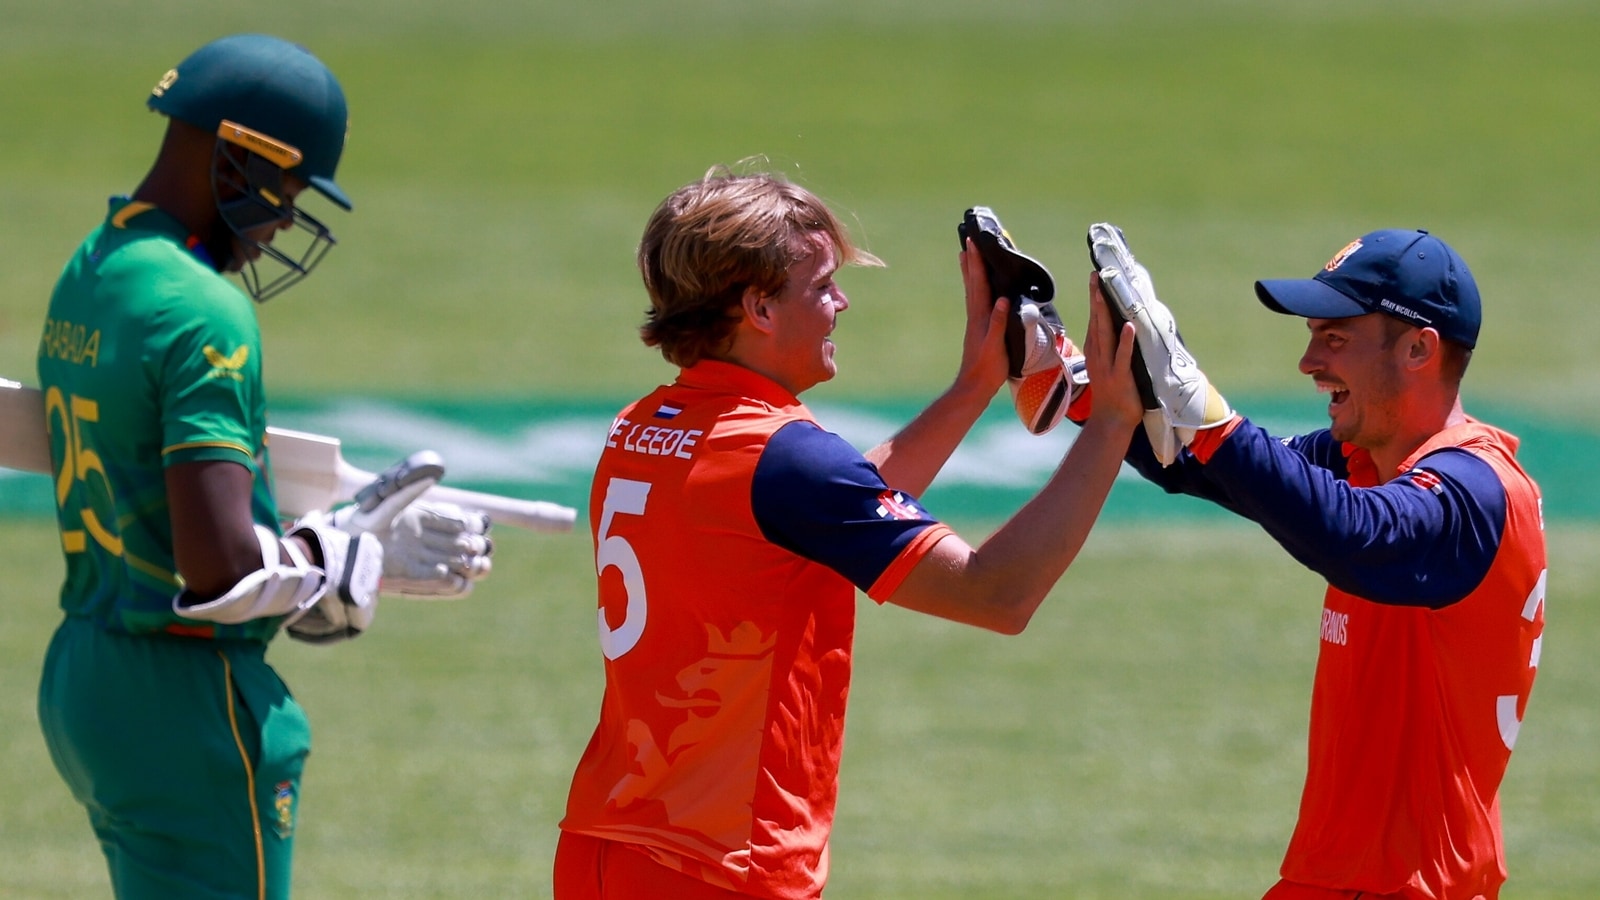 south-africa-vs-netherlands-highlights-t20-world-cup-2022-sa-knocked-out-of-semis-contention-crash-to-defeat-vs-ned